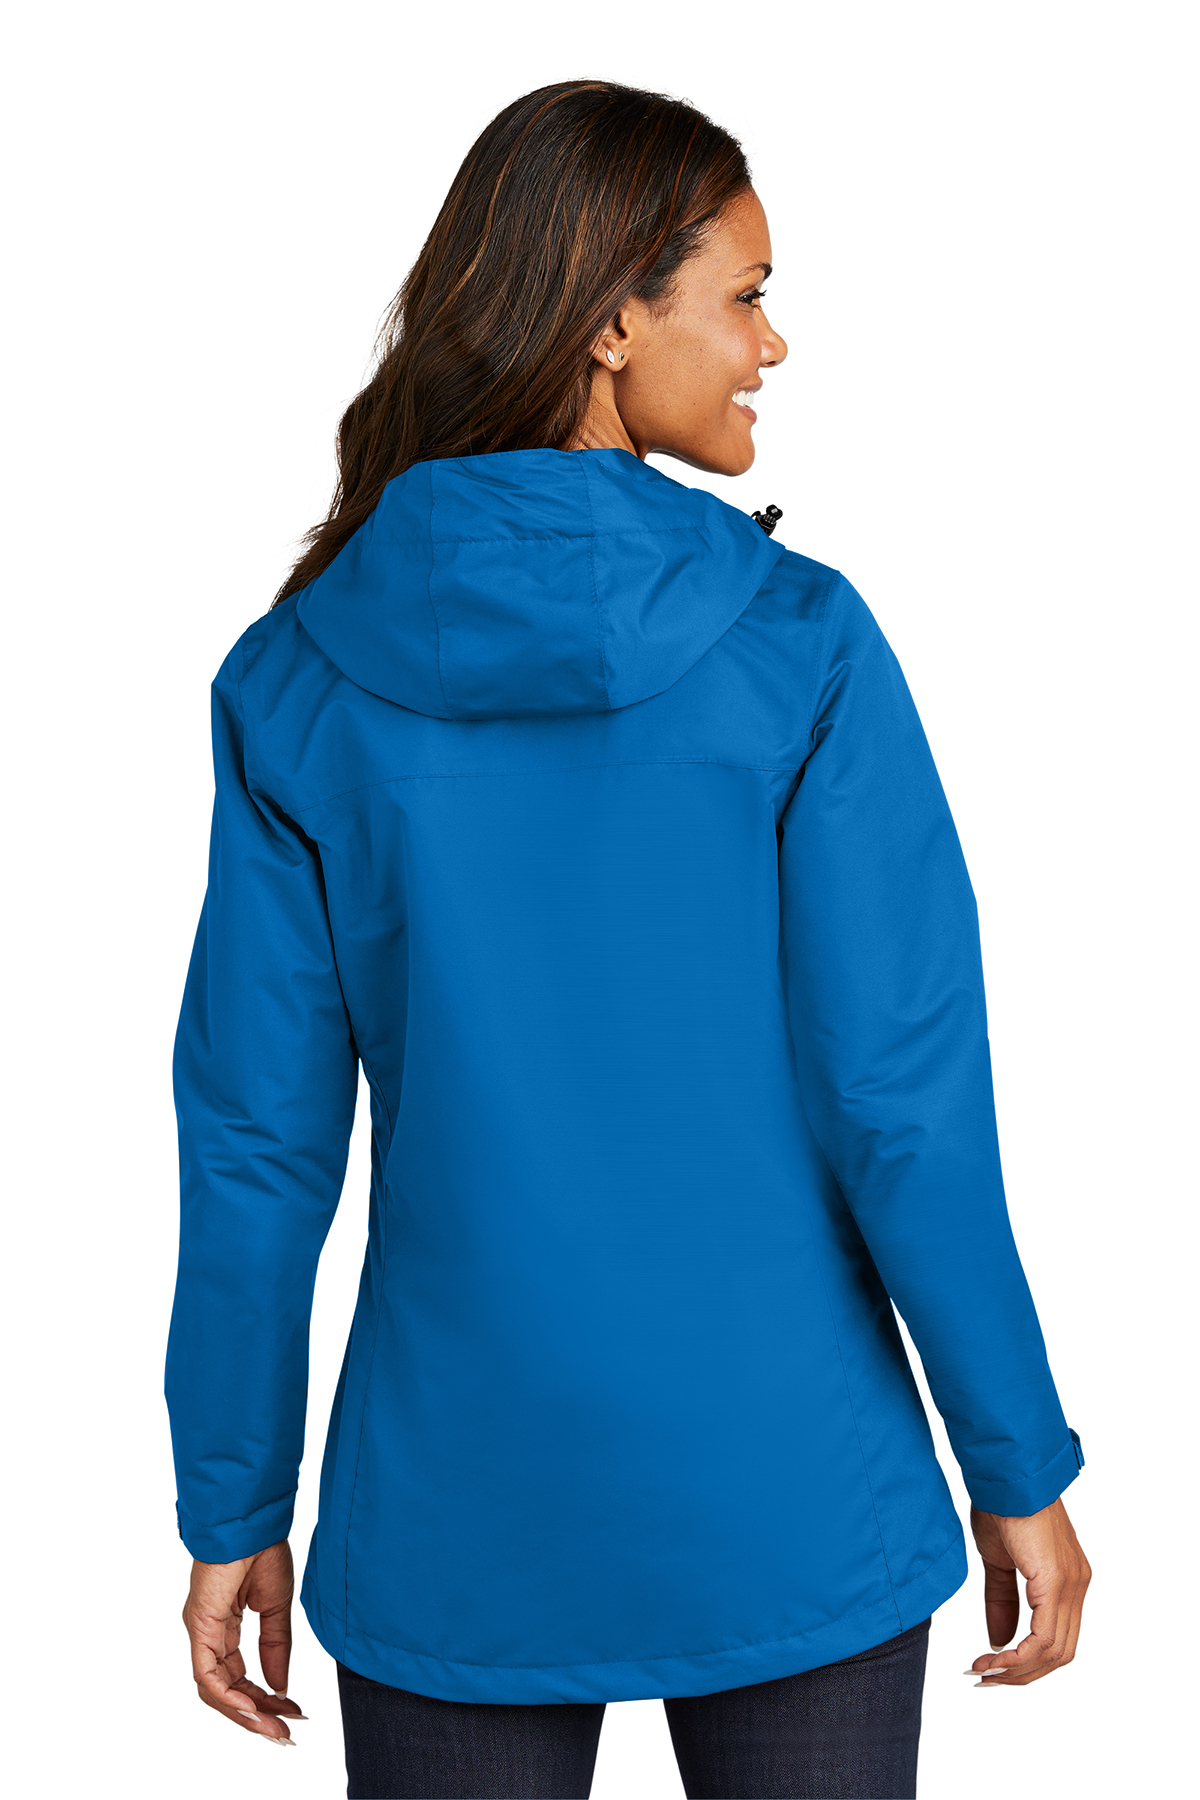 Port Authority Ladies All-Conditions Jacket | Product | SanMar | 